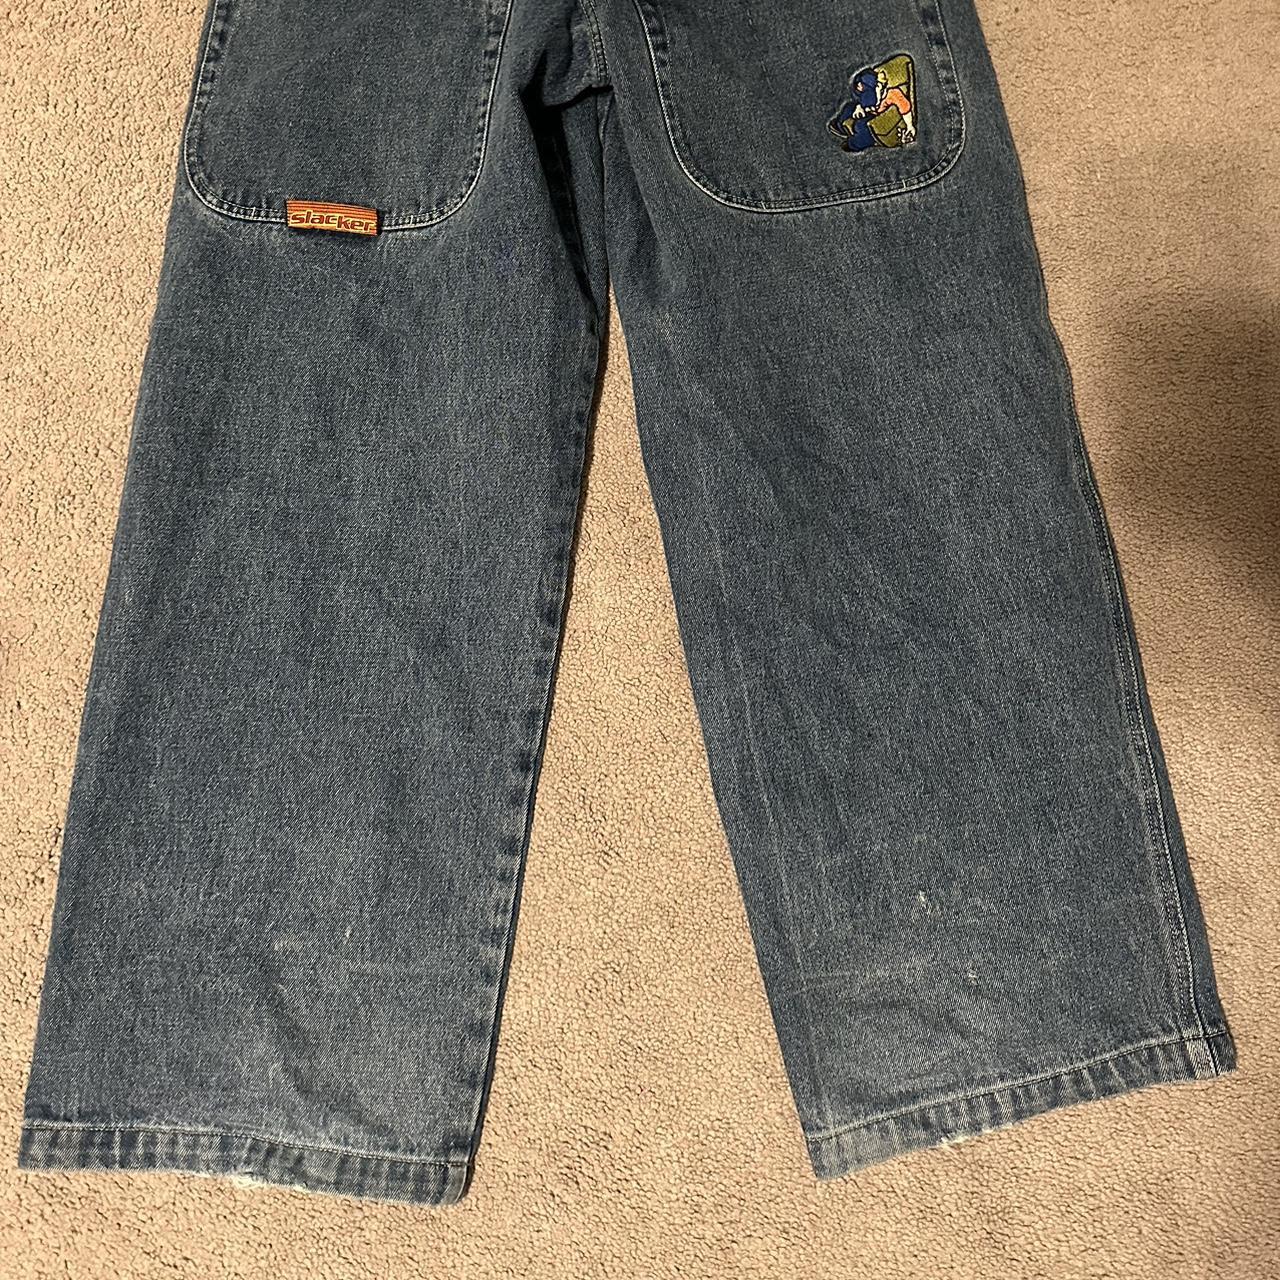 Jnco Slackers 32W 32in Fits great Relisted cause i... - Depop